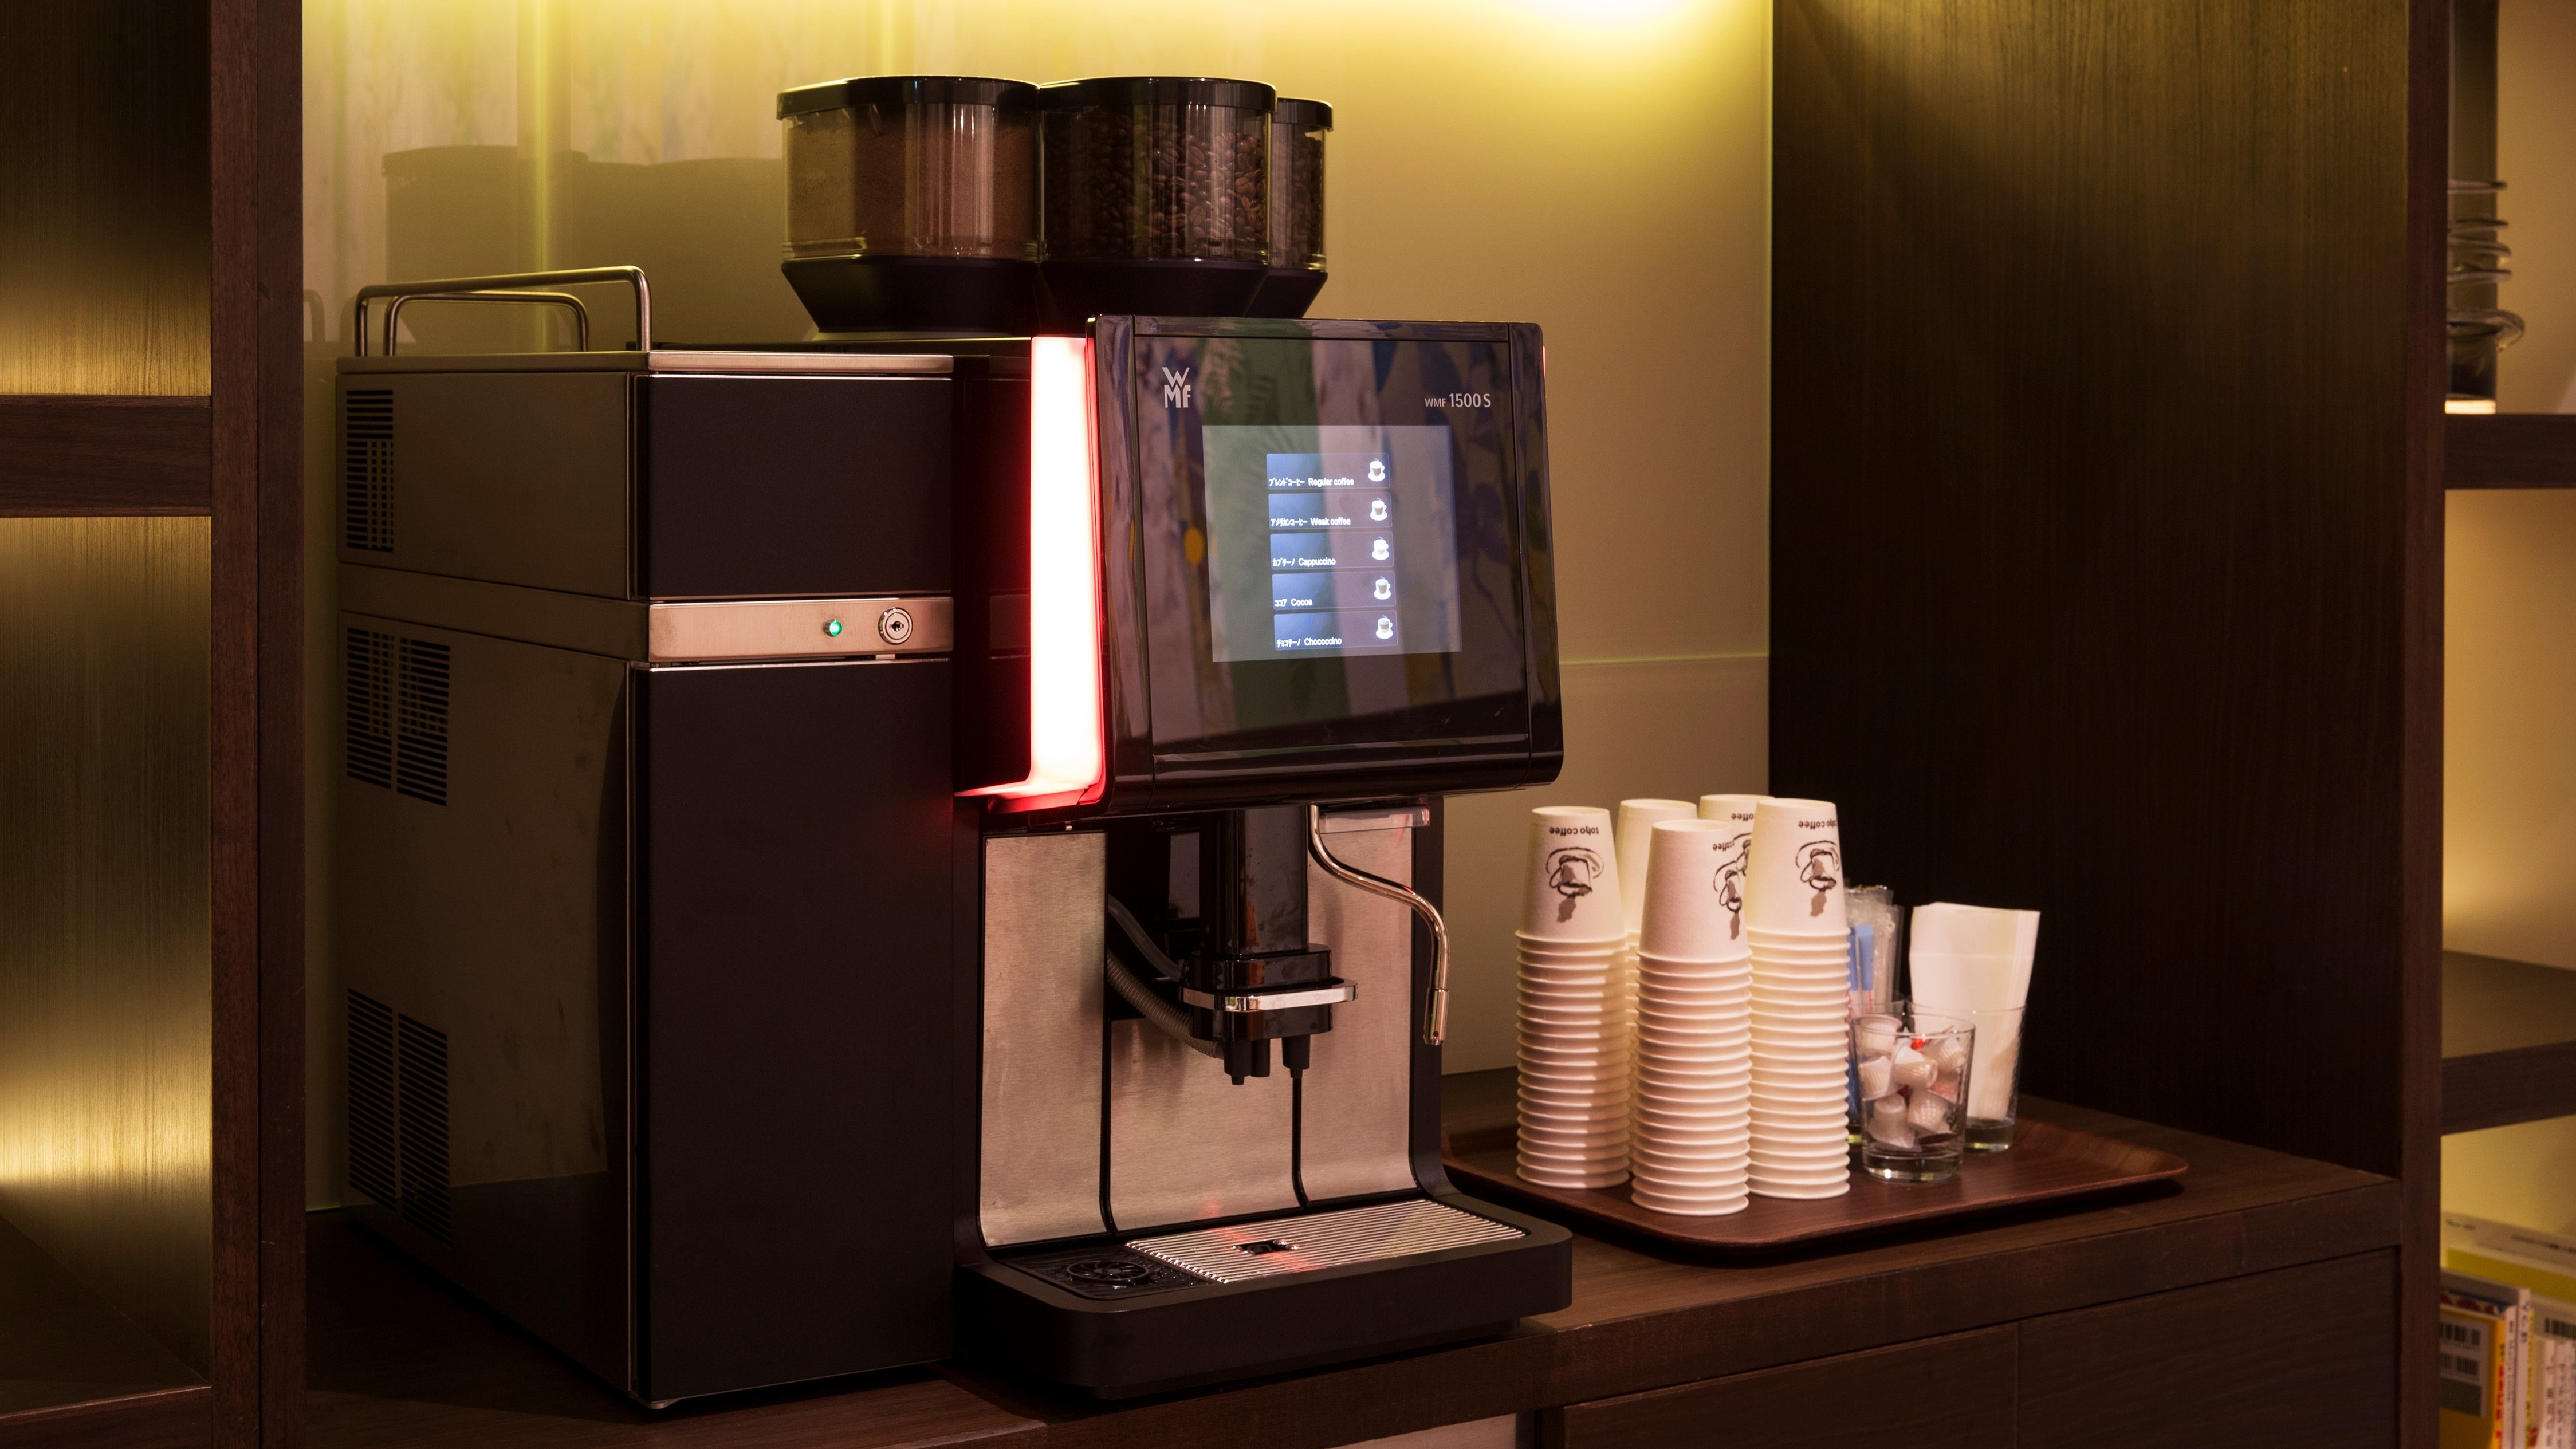 Free coffee machine for hotel guests